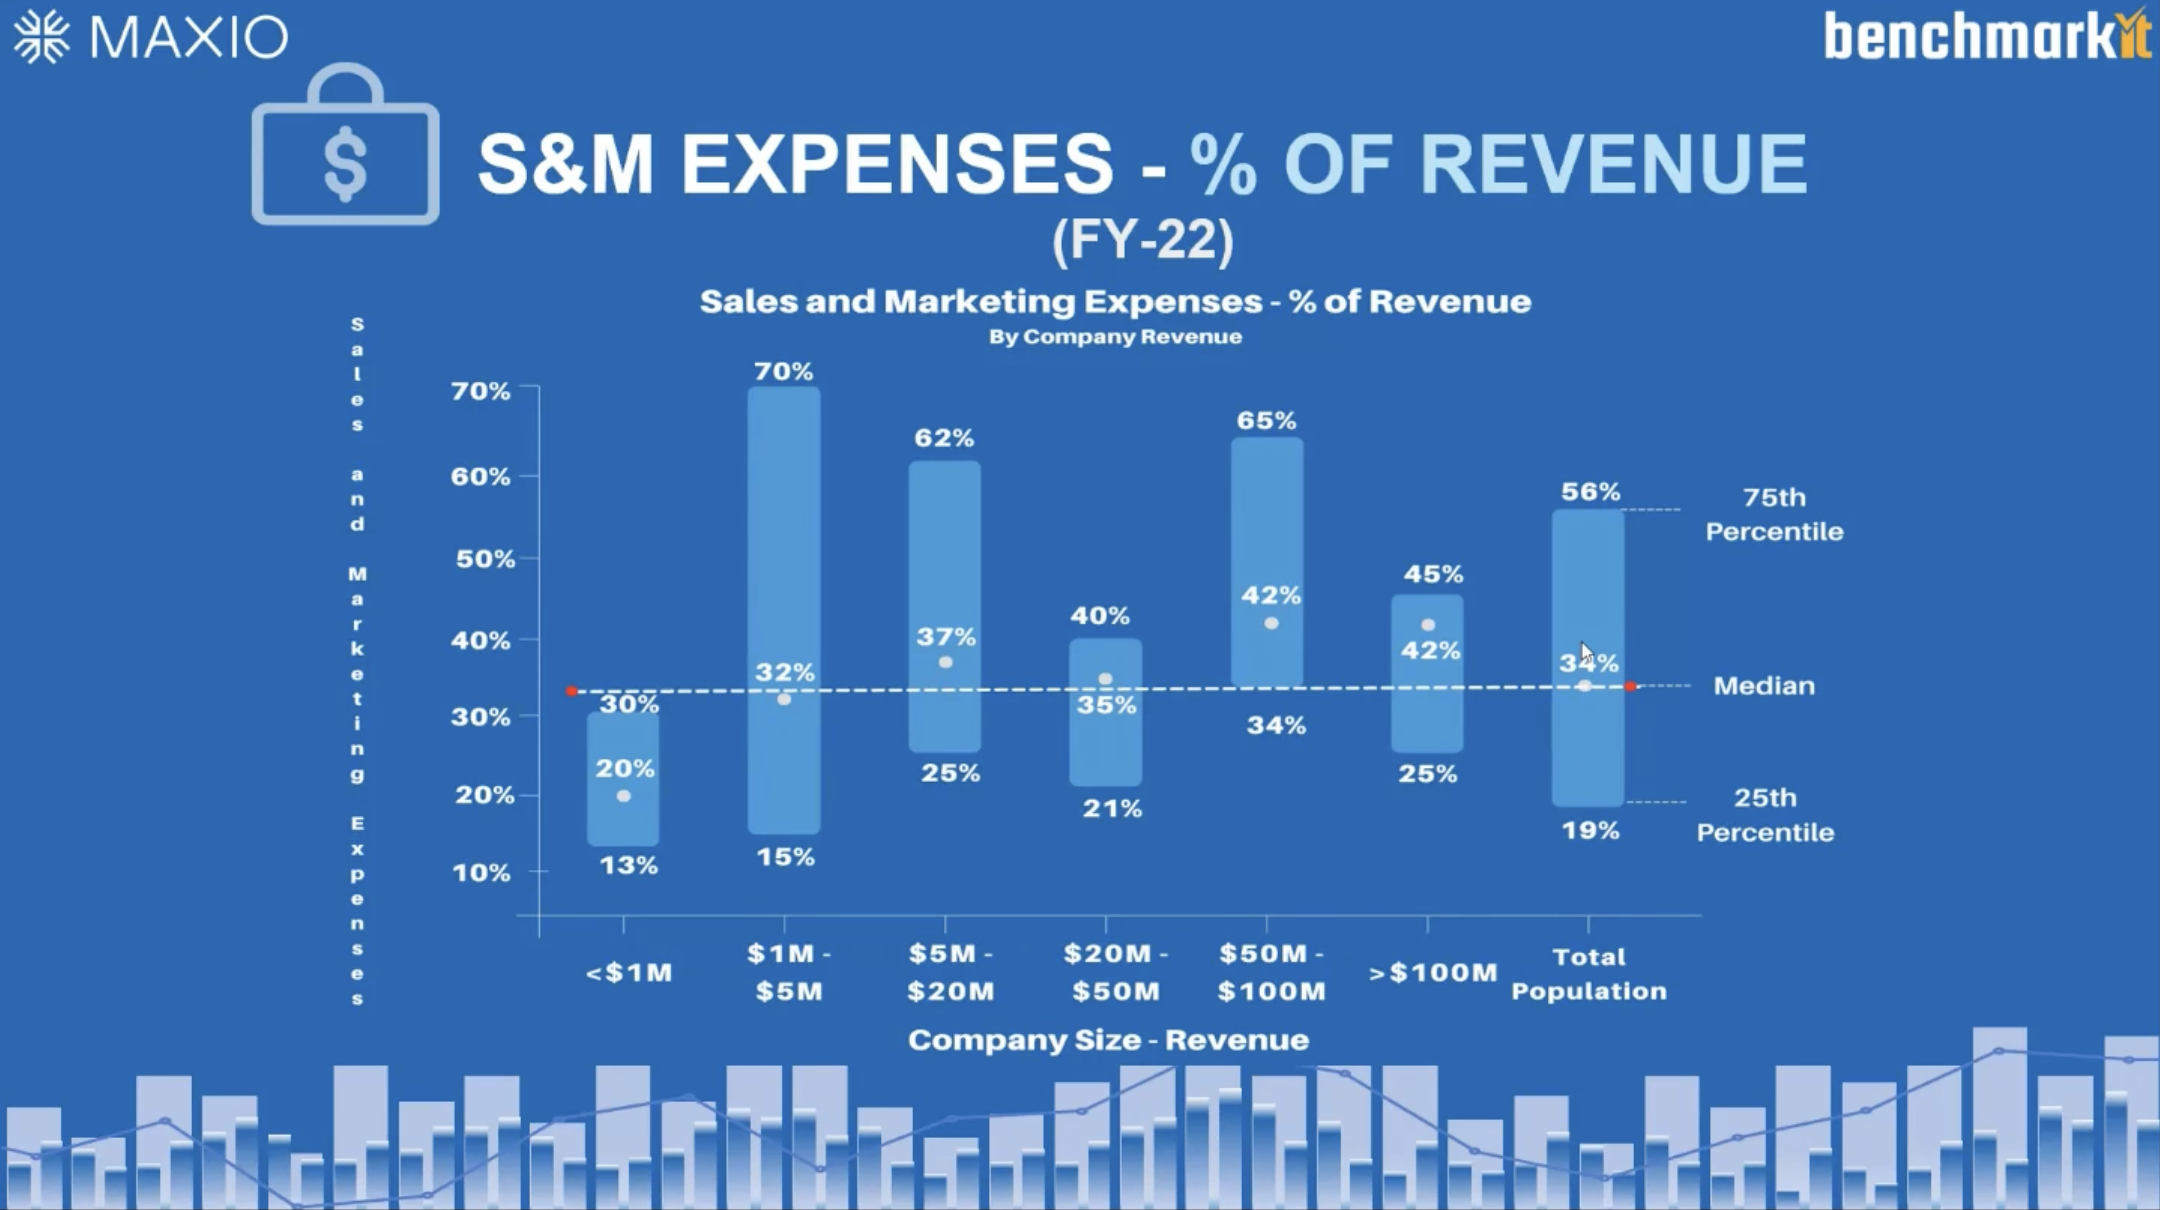 Maxio and Benchmarkit's FY-2022 S&M Expenses chart